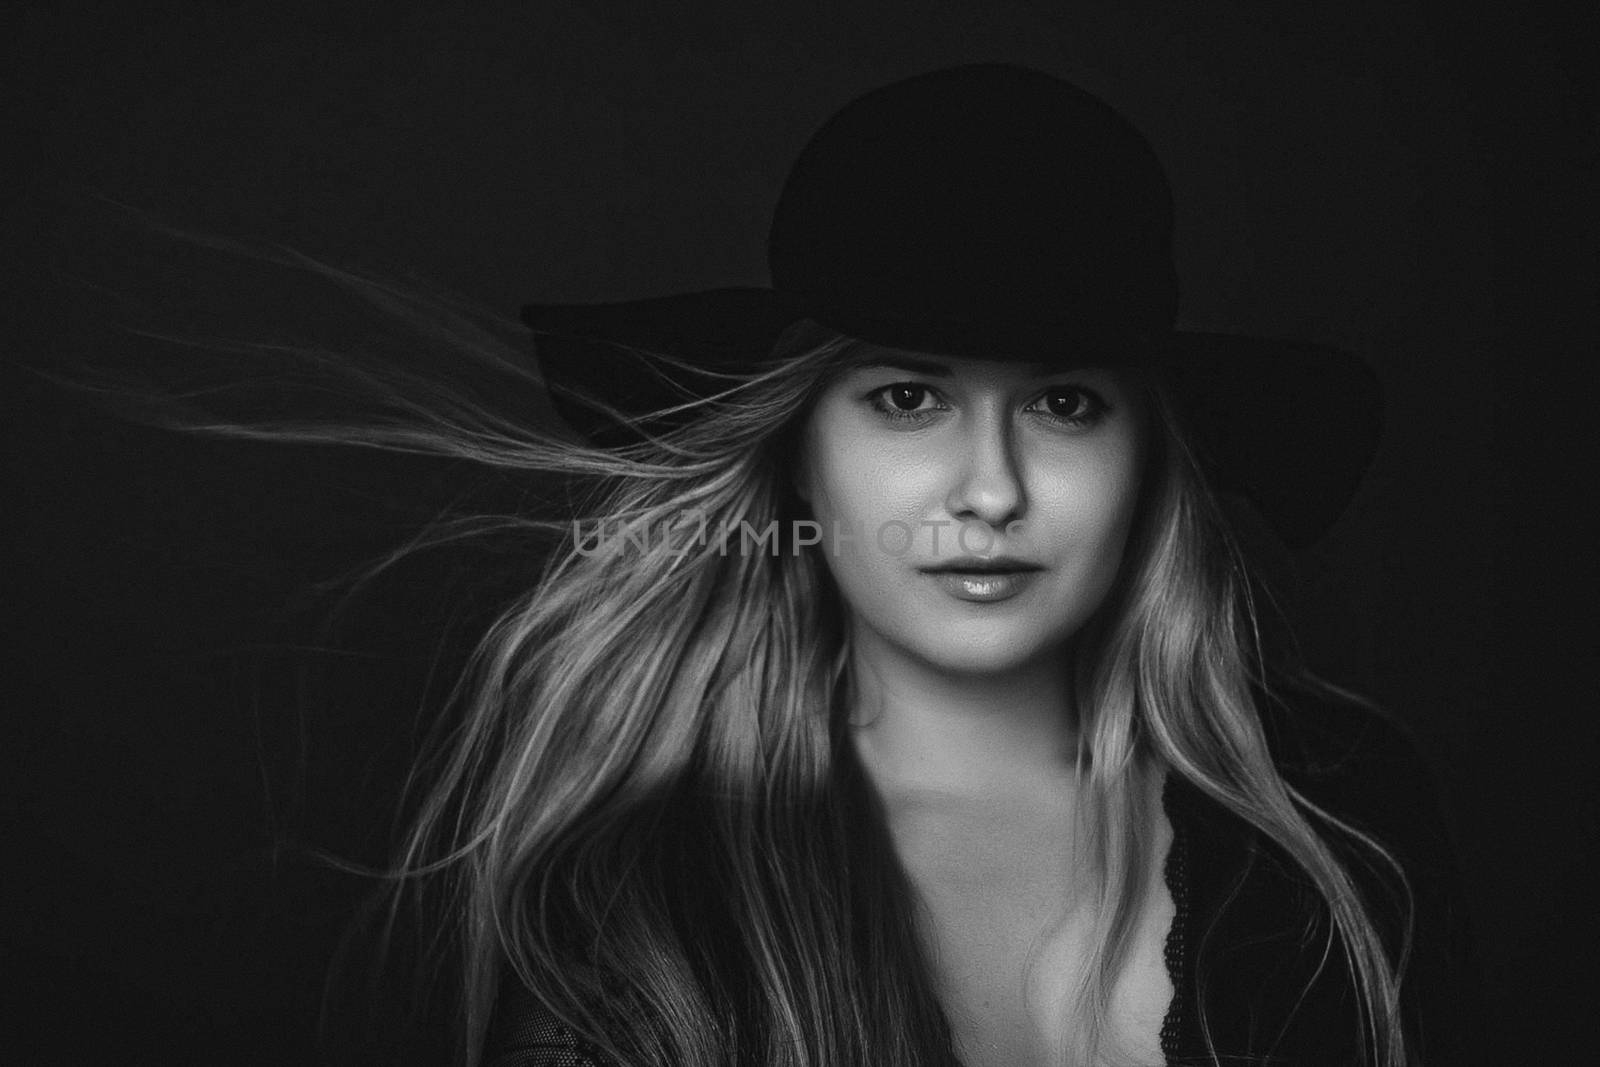 Beautiful blonde woman wearing a hat, artistic film portrait in black and white for fashion campaign and beauty brands